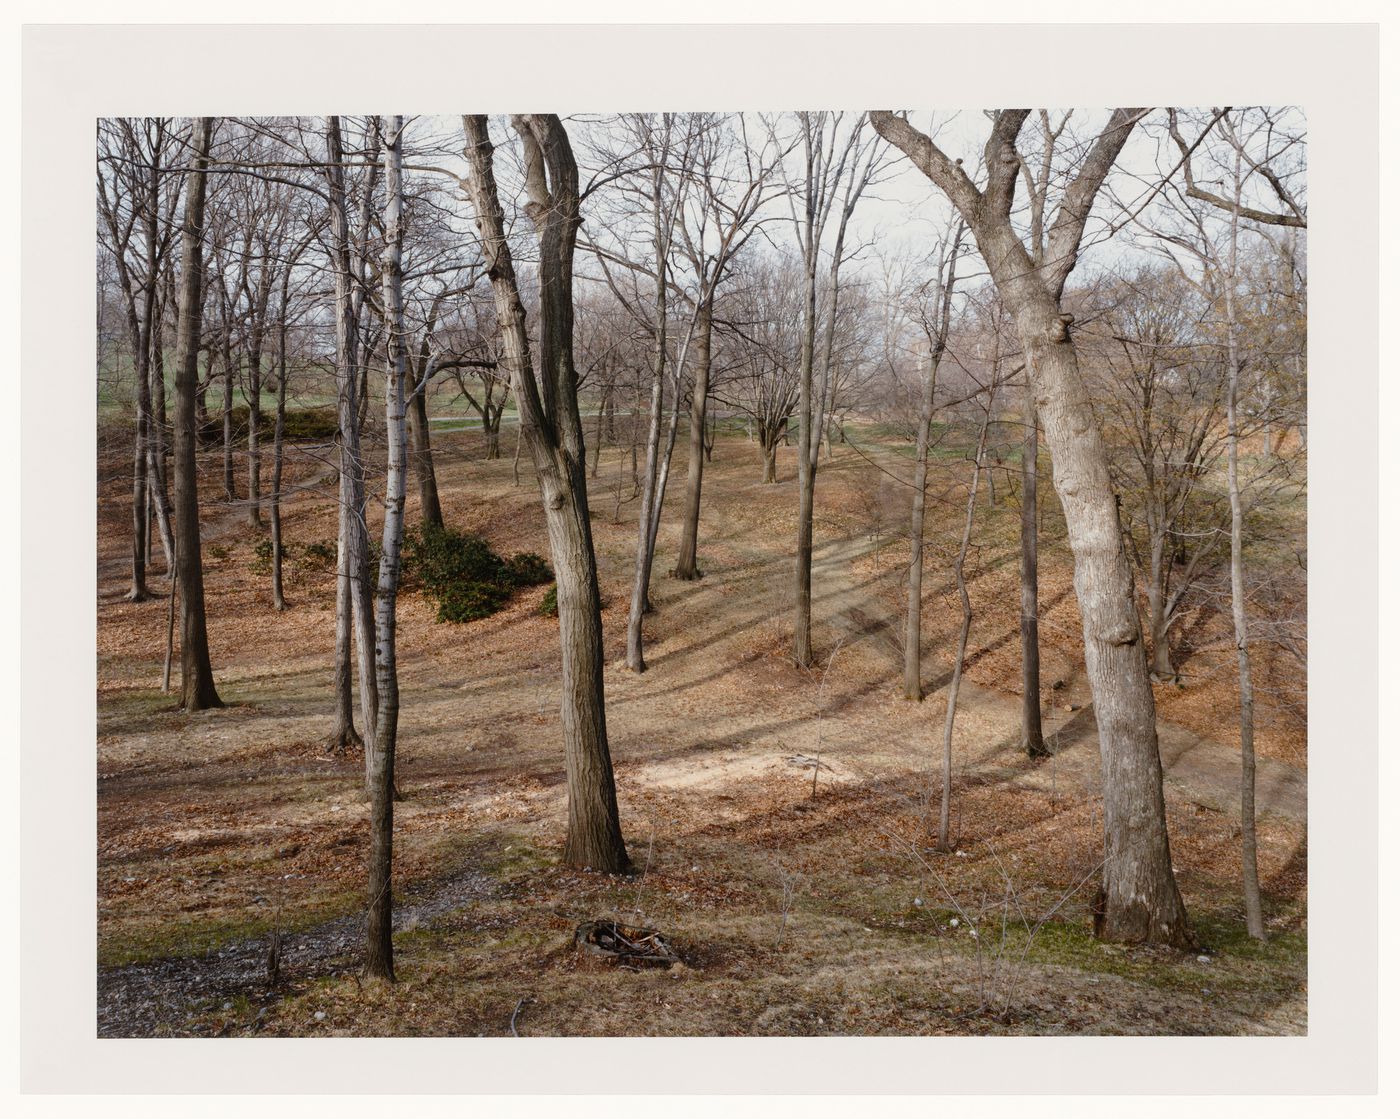 Viewing Olmsted: View of The Arnold Arboretum, Boston, Massachusetts